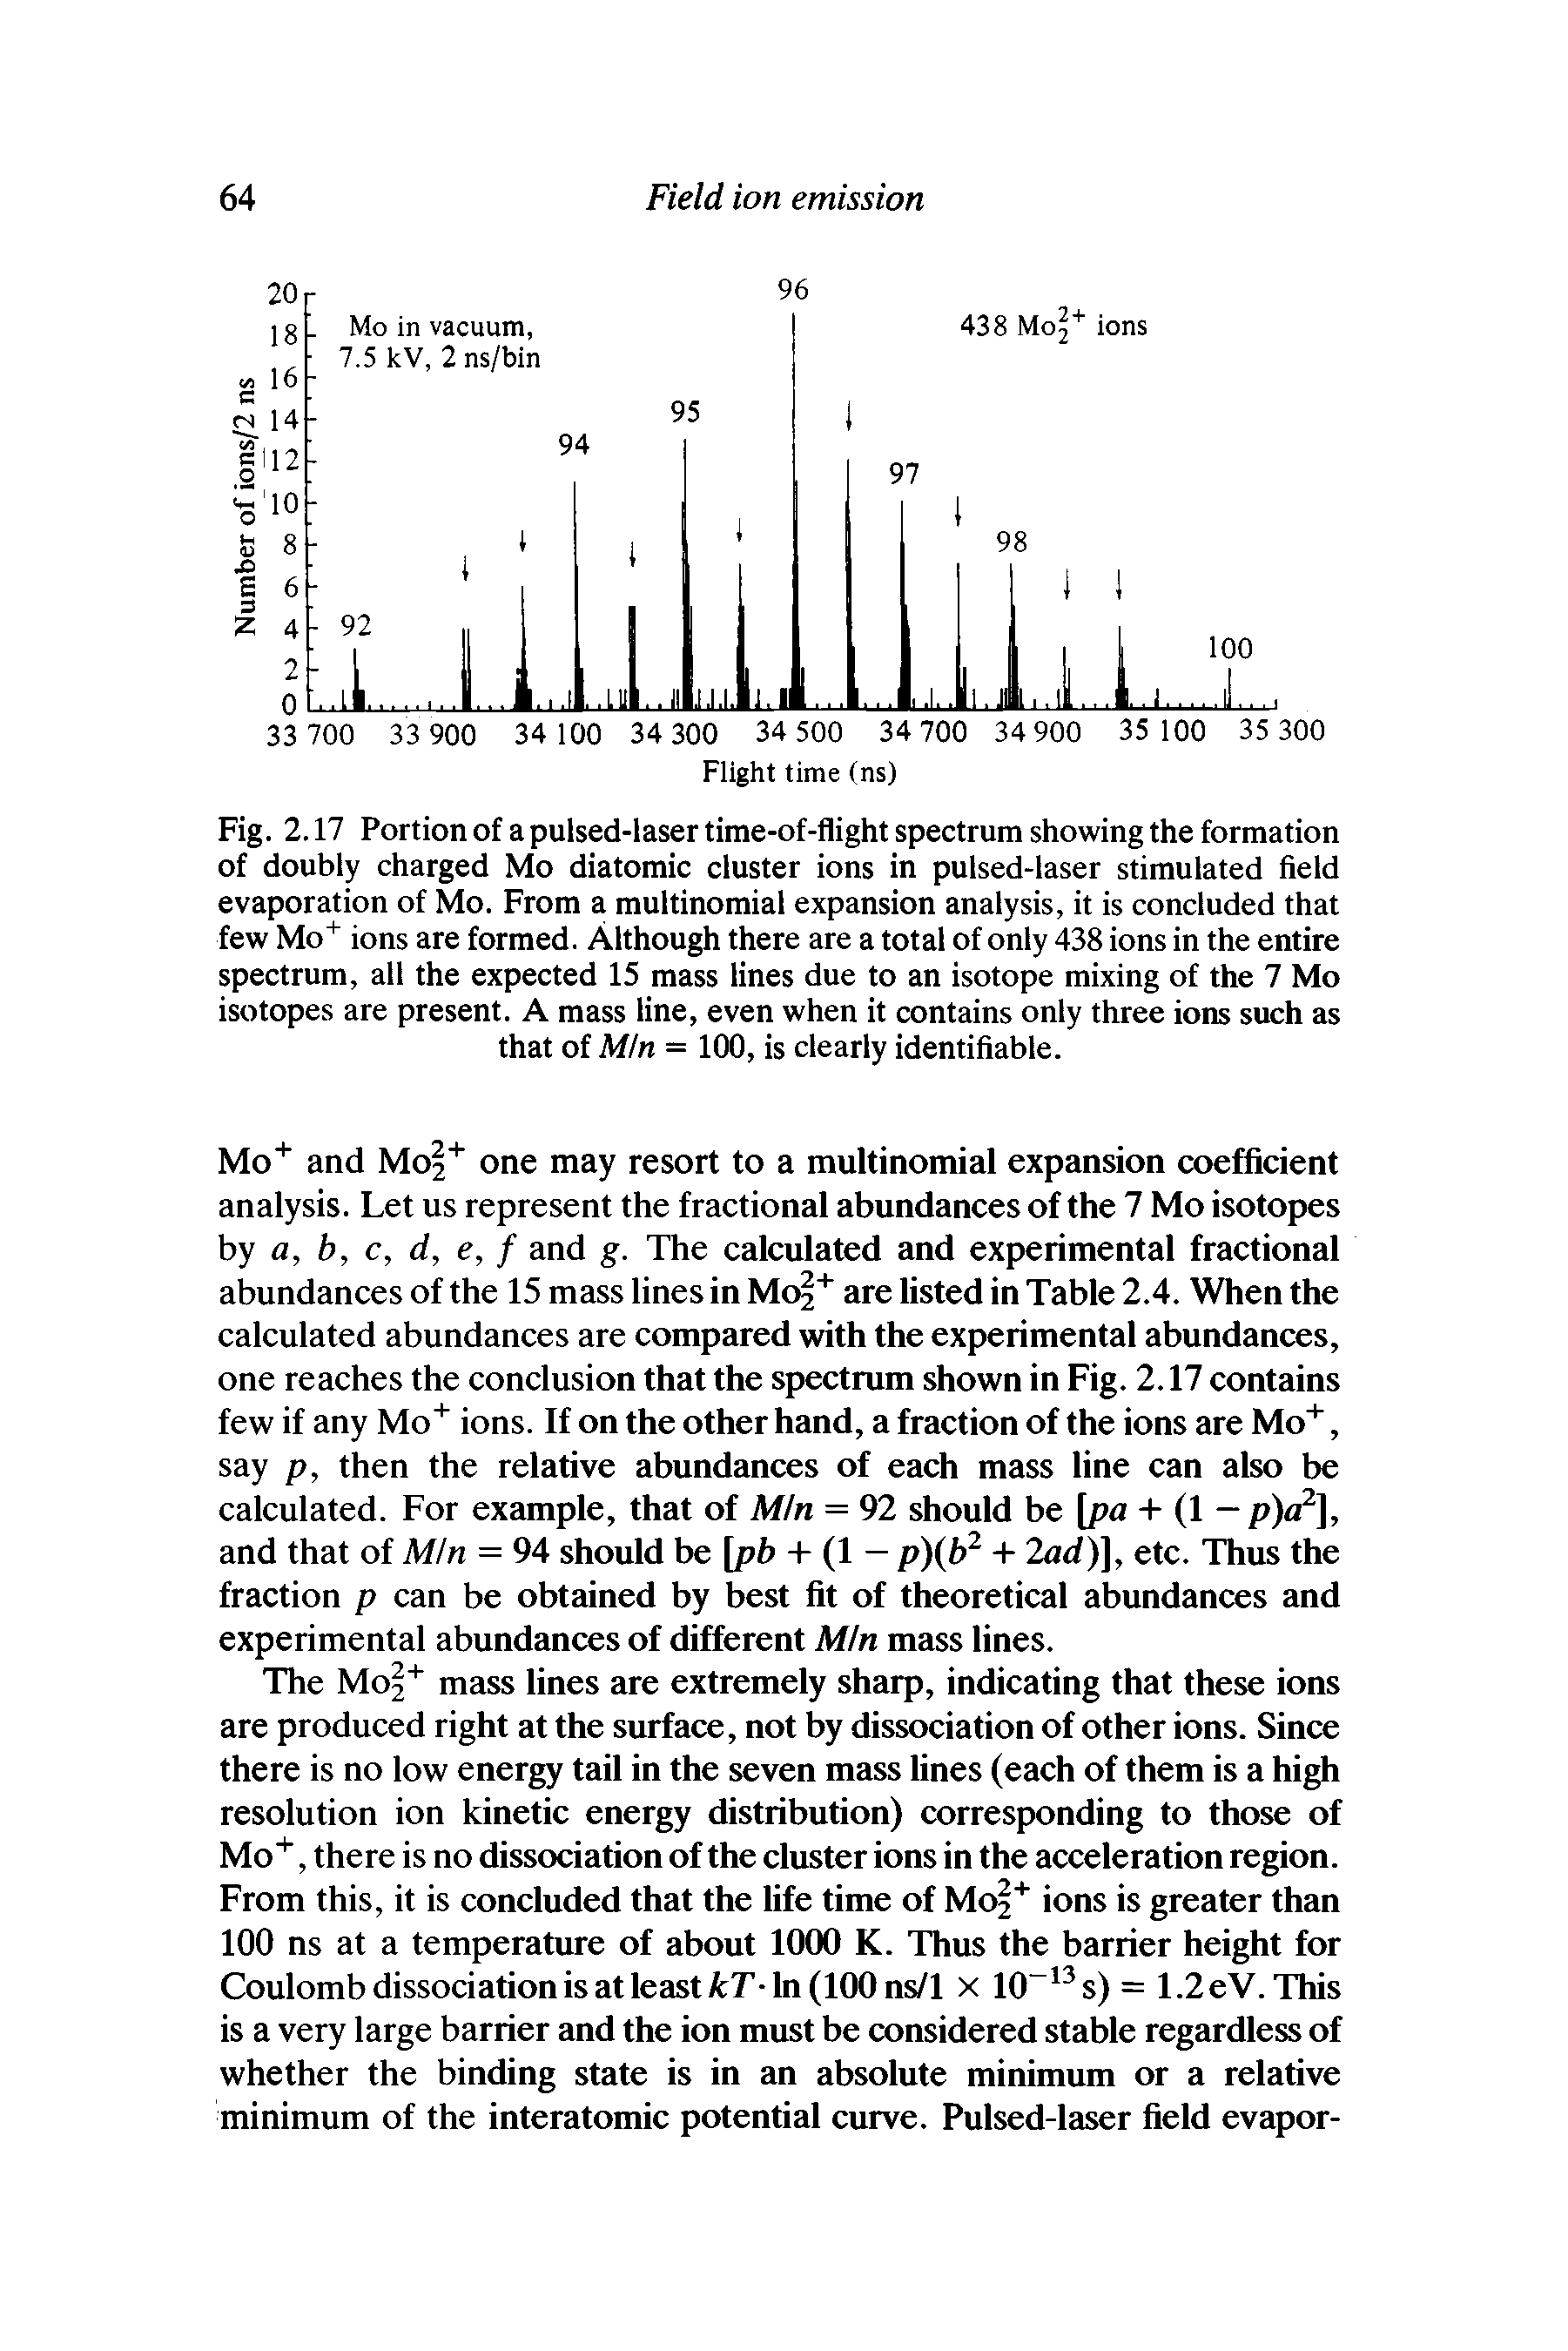 Fig. 2.17 Portion of a pulsed-laser time-of-flight spectrum showing the formation of doubly charged Mo diatomic cluster ions in pulsed-laser stimulated field evaporation of Mo. From a multinomial expansion analysis, it is concluded that few Mo+ ions are formed. Although there are a total of only 438 ions in the entire spectrum, all the expected 15 mass lines due to an isotope mixing of the 7 Mo isotopes are present. A mass line, even when it contains only three ions such as that of Min = 100, is clearly identifiable.